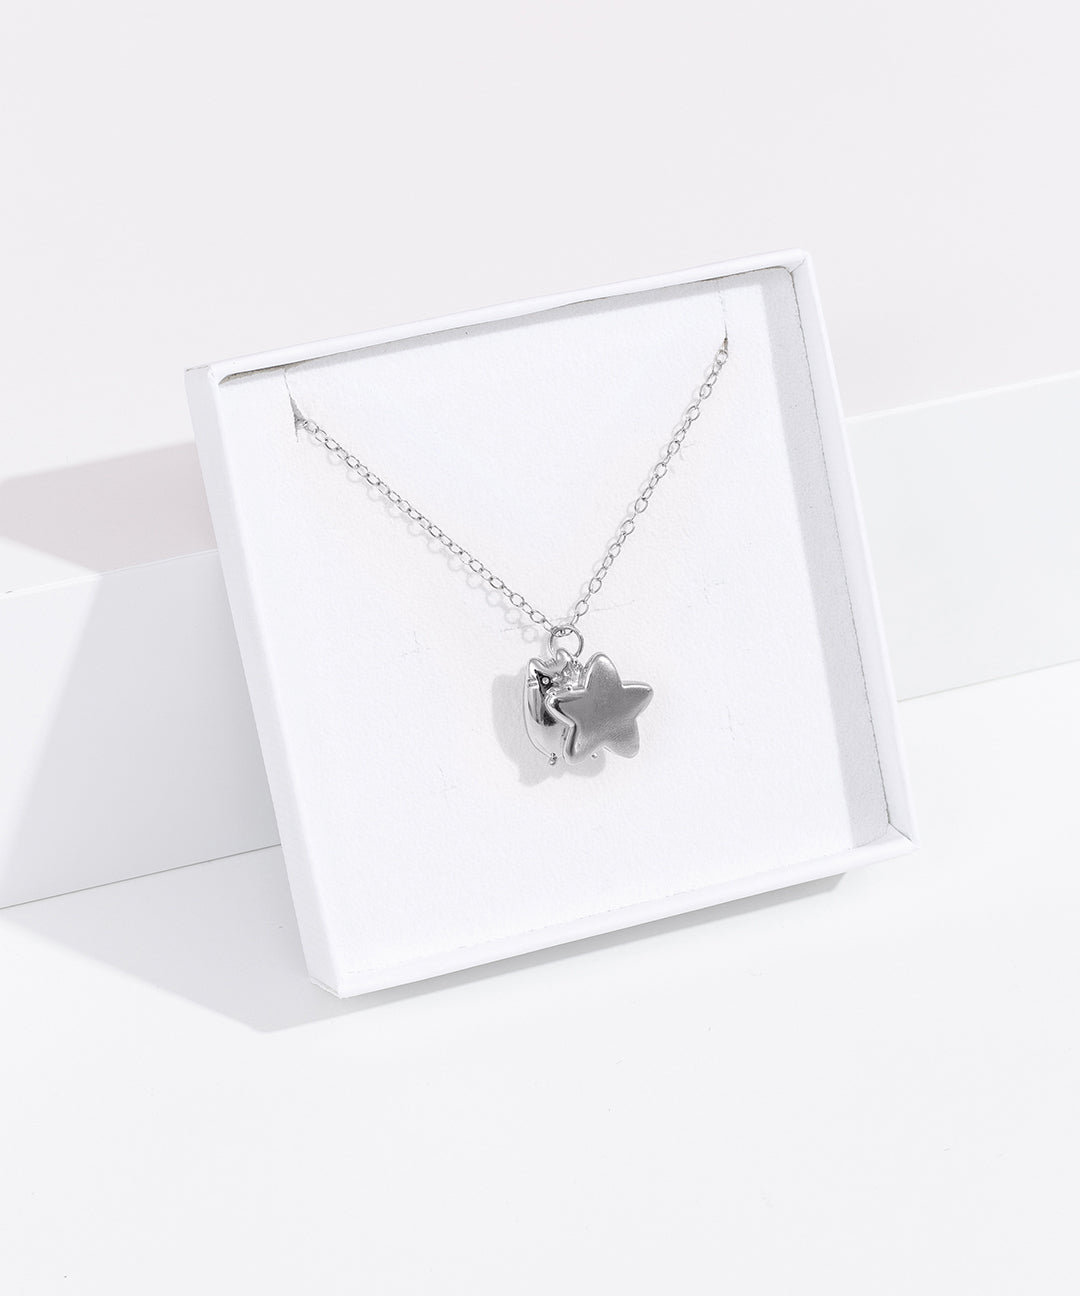 Lucia's Necklace - Star, Body, and Heart Charm Necklace